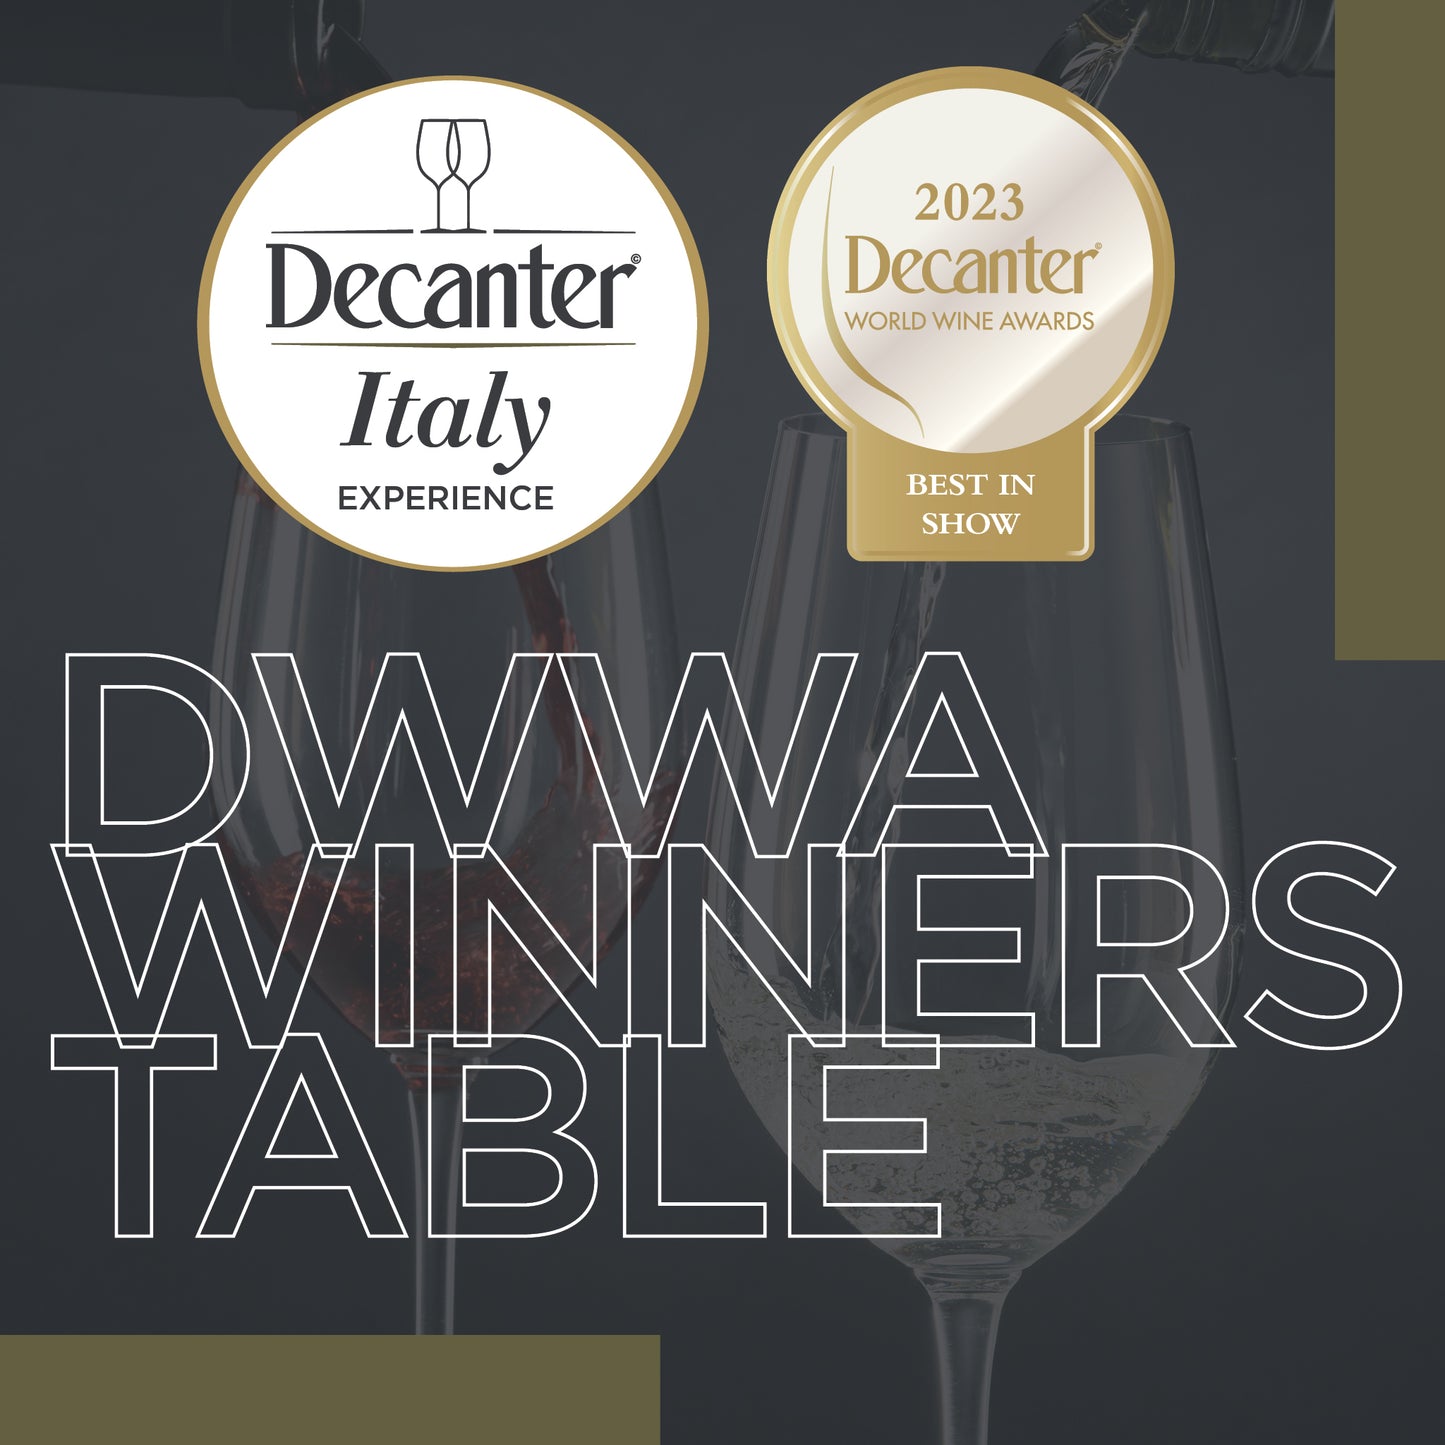 DWWA 2023 BEST IN SHOW registration – Decanter Italy Experience